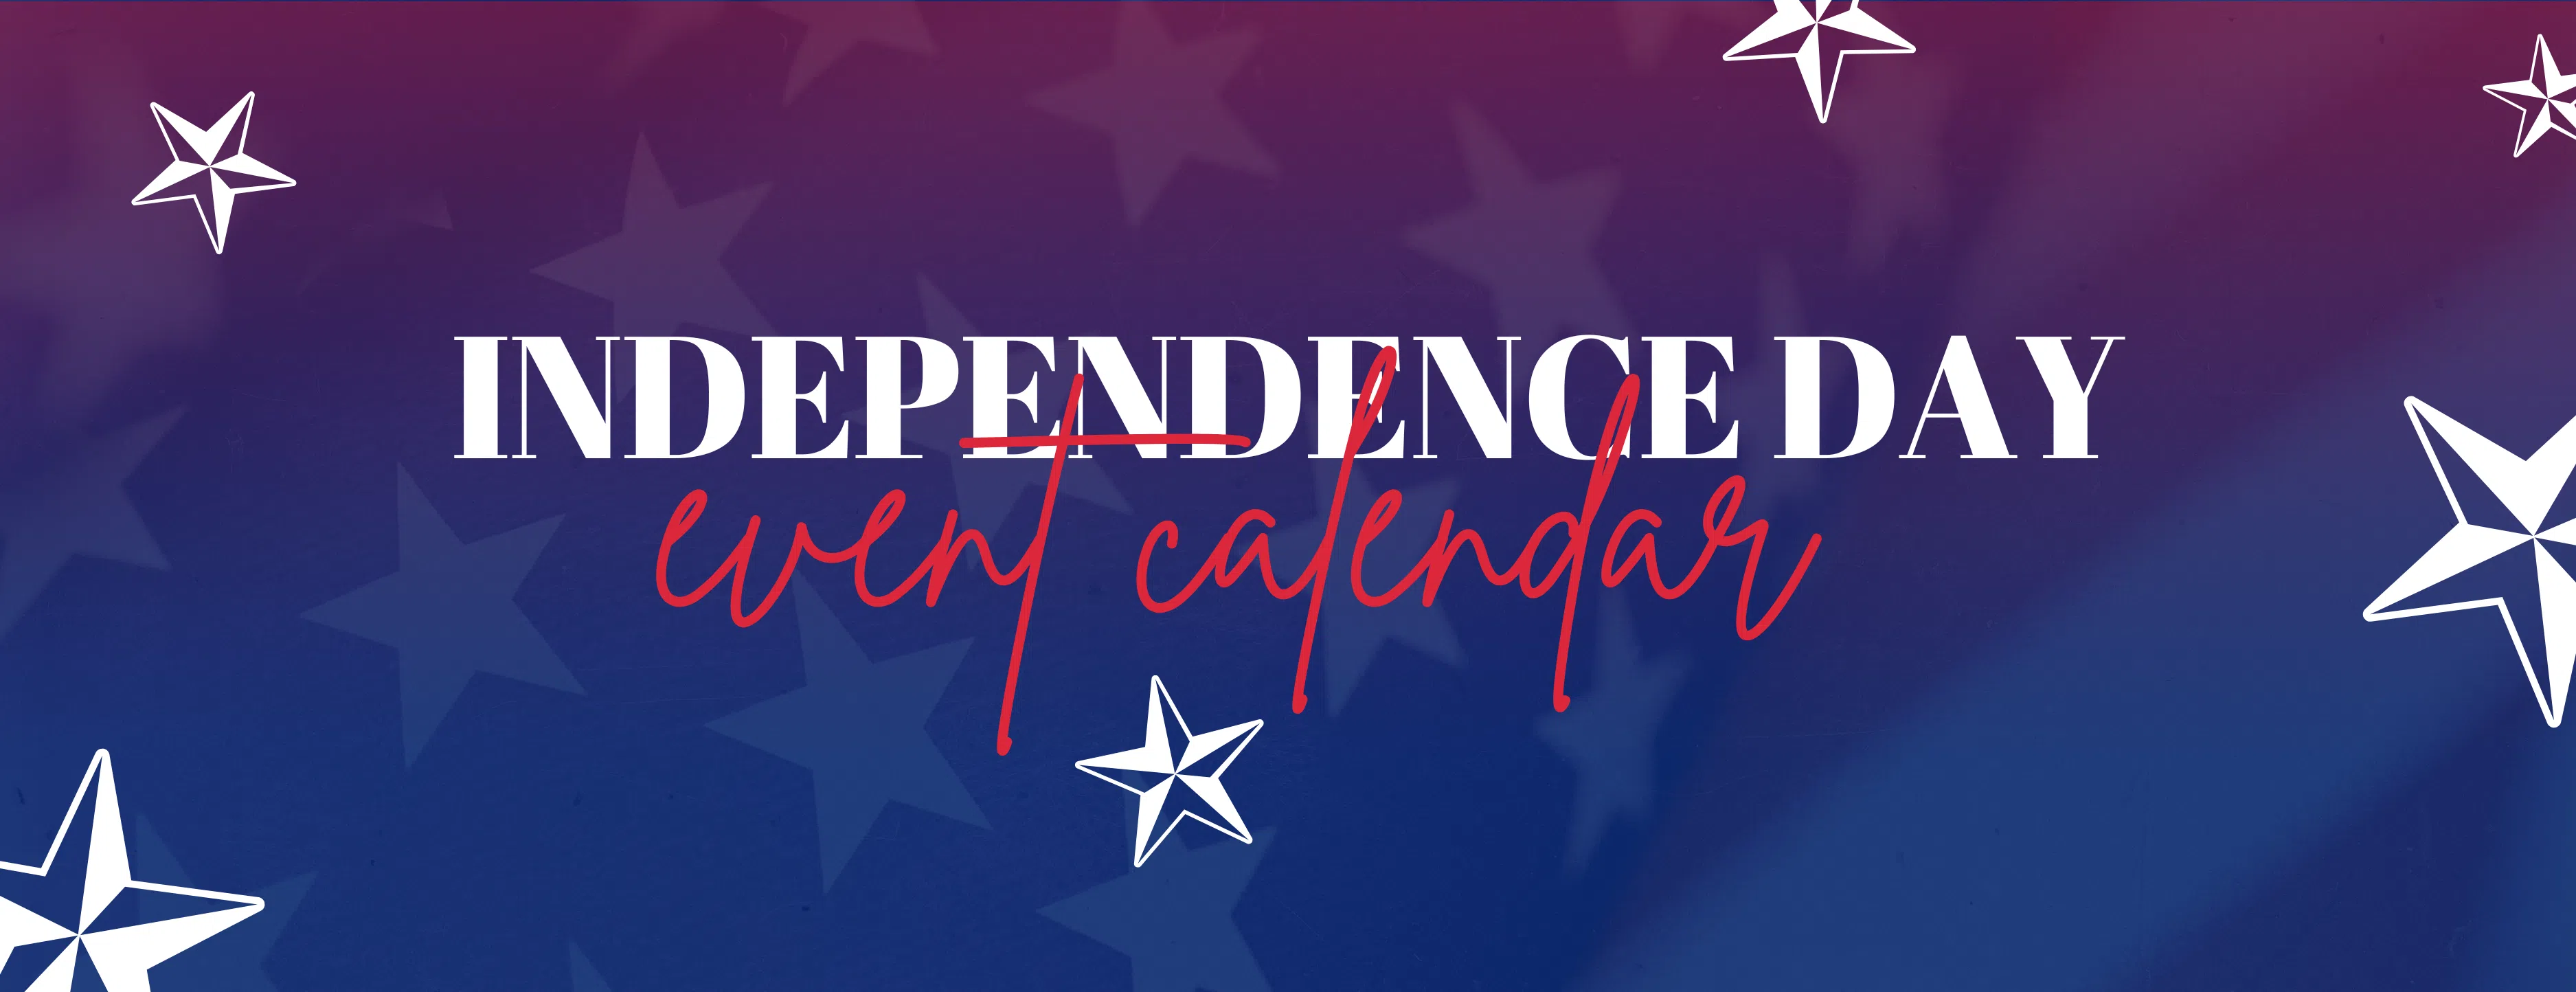 independence day events calendar